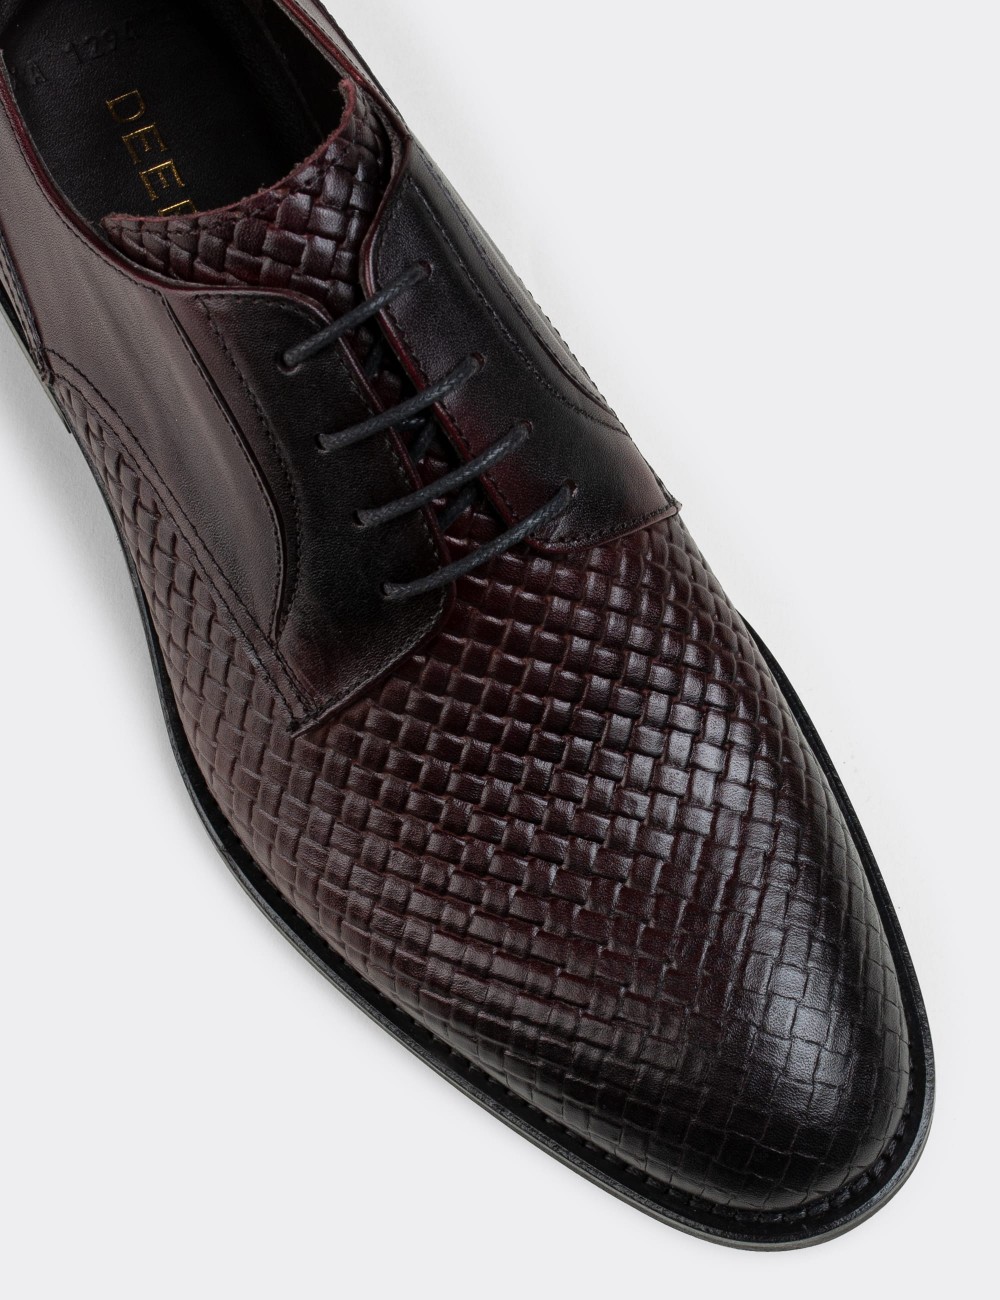 Burgundy  Leather Classic Shoes - 01294MBRDM03